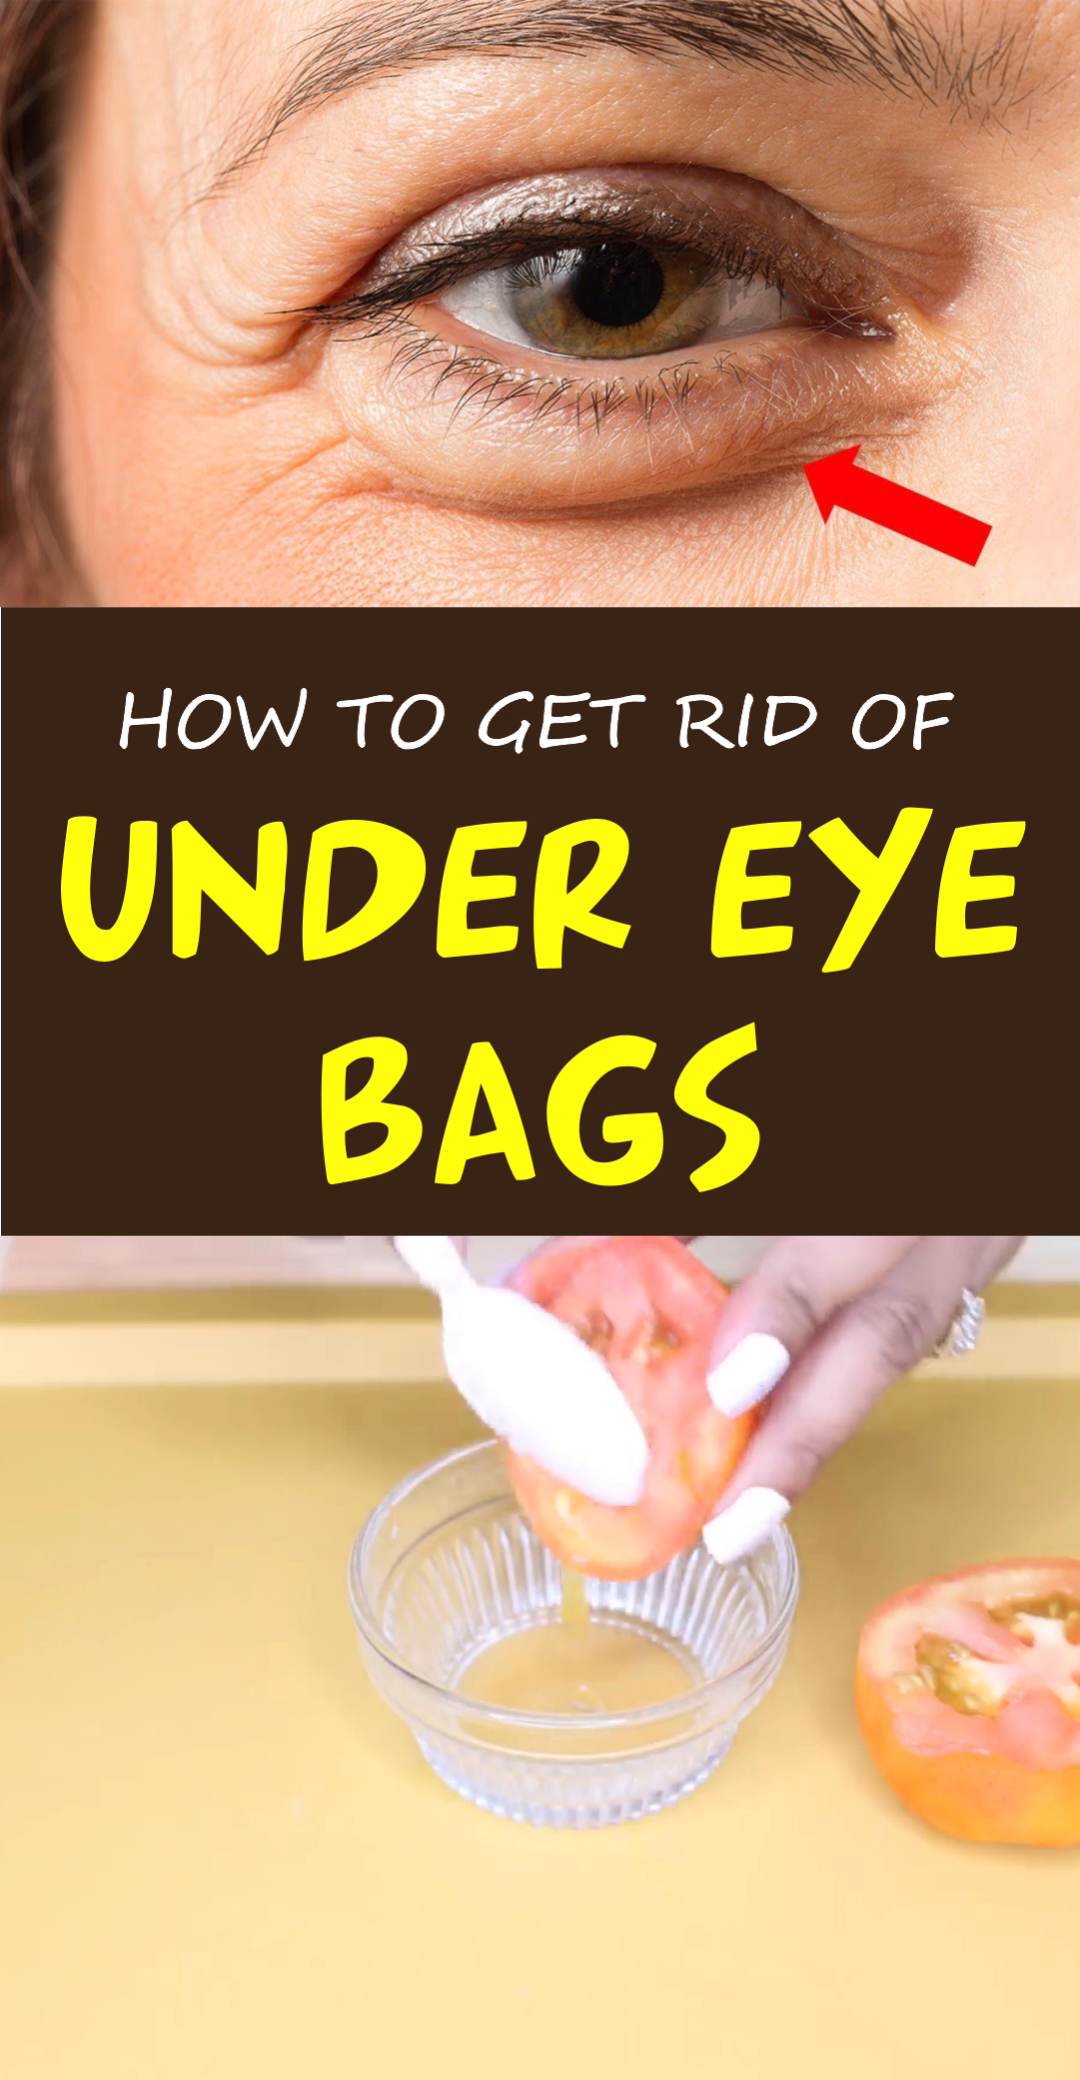 How to Get Rid of Dark Circles Under Your Eyes: Top 9 Home Remedies that Work - How to Get Rid of Dark Circles Under Your Eyes: Top 9 Home Remedies that Work -   18 beauty DIY hacks ideas